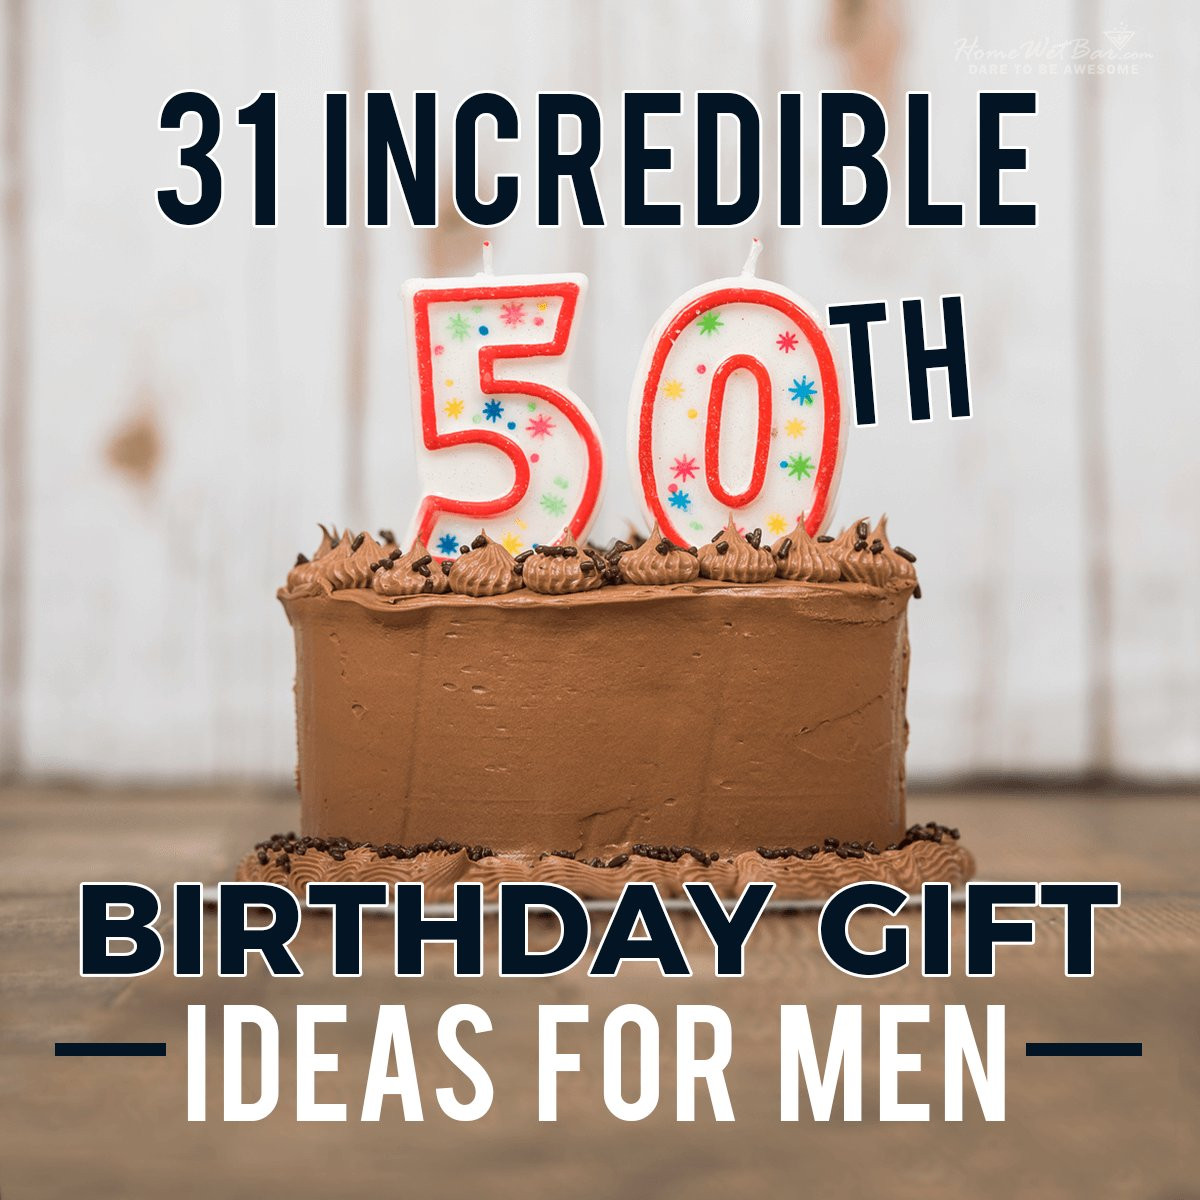 Male 50Th Birthday Gift Ideas
 31 Incredible 50th Birthday Gift Ideas for Men